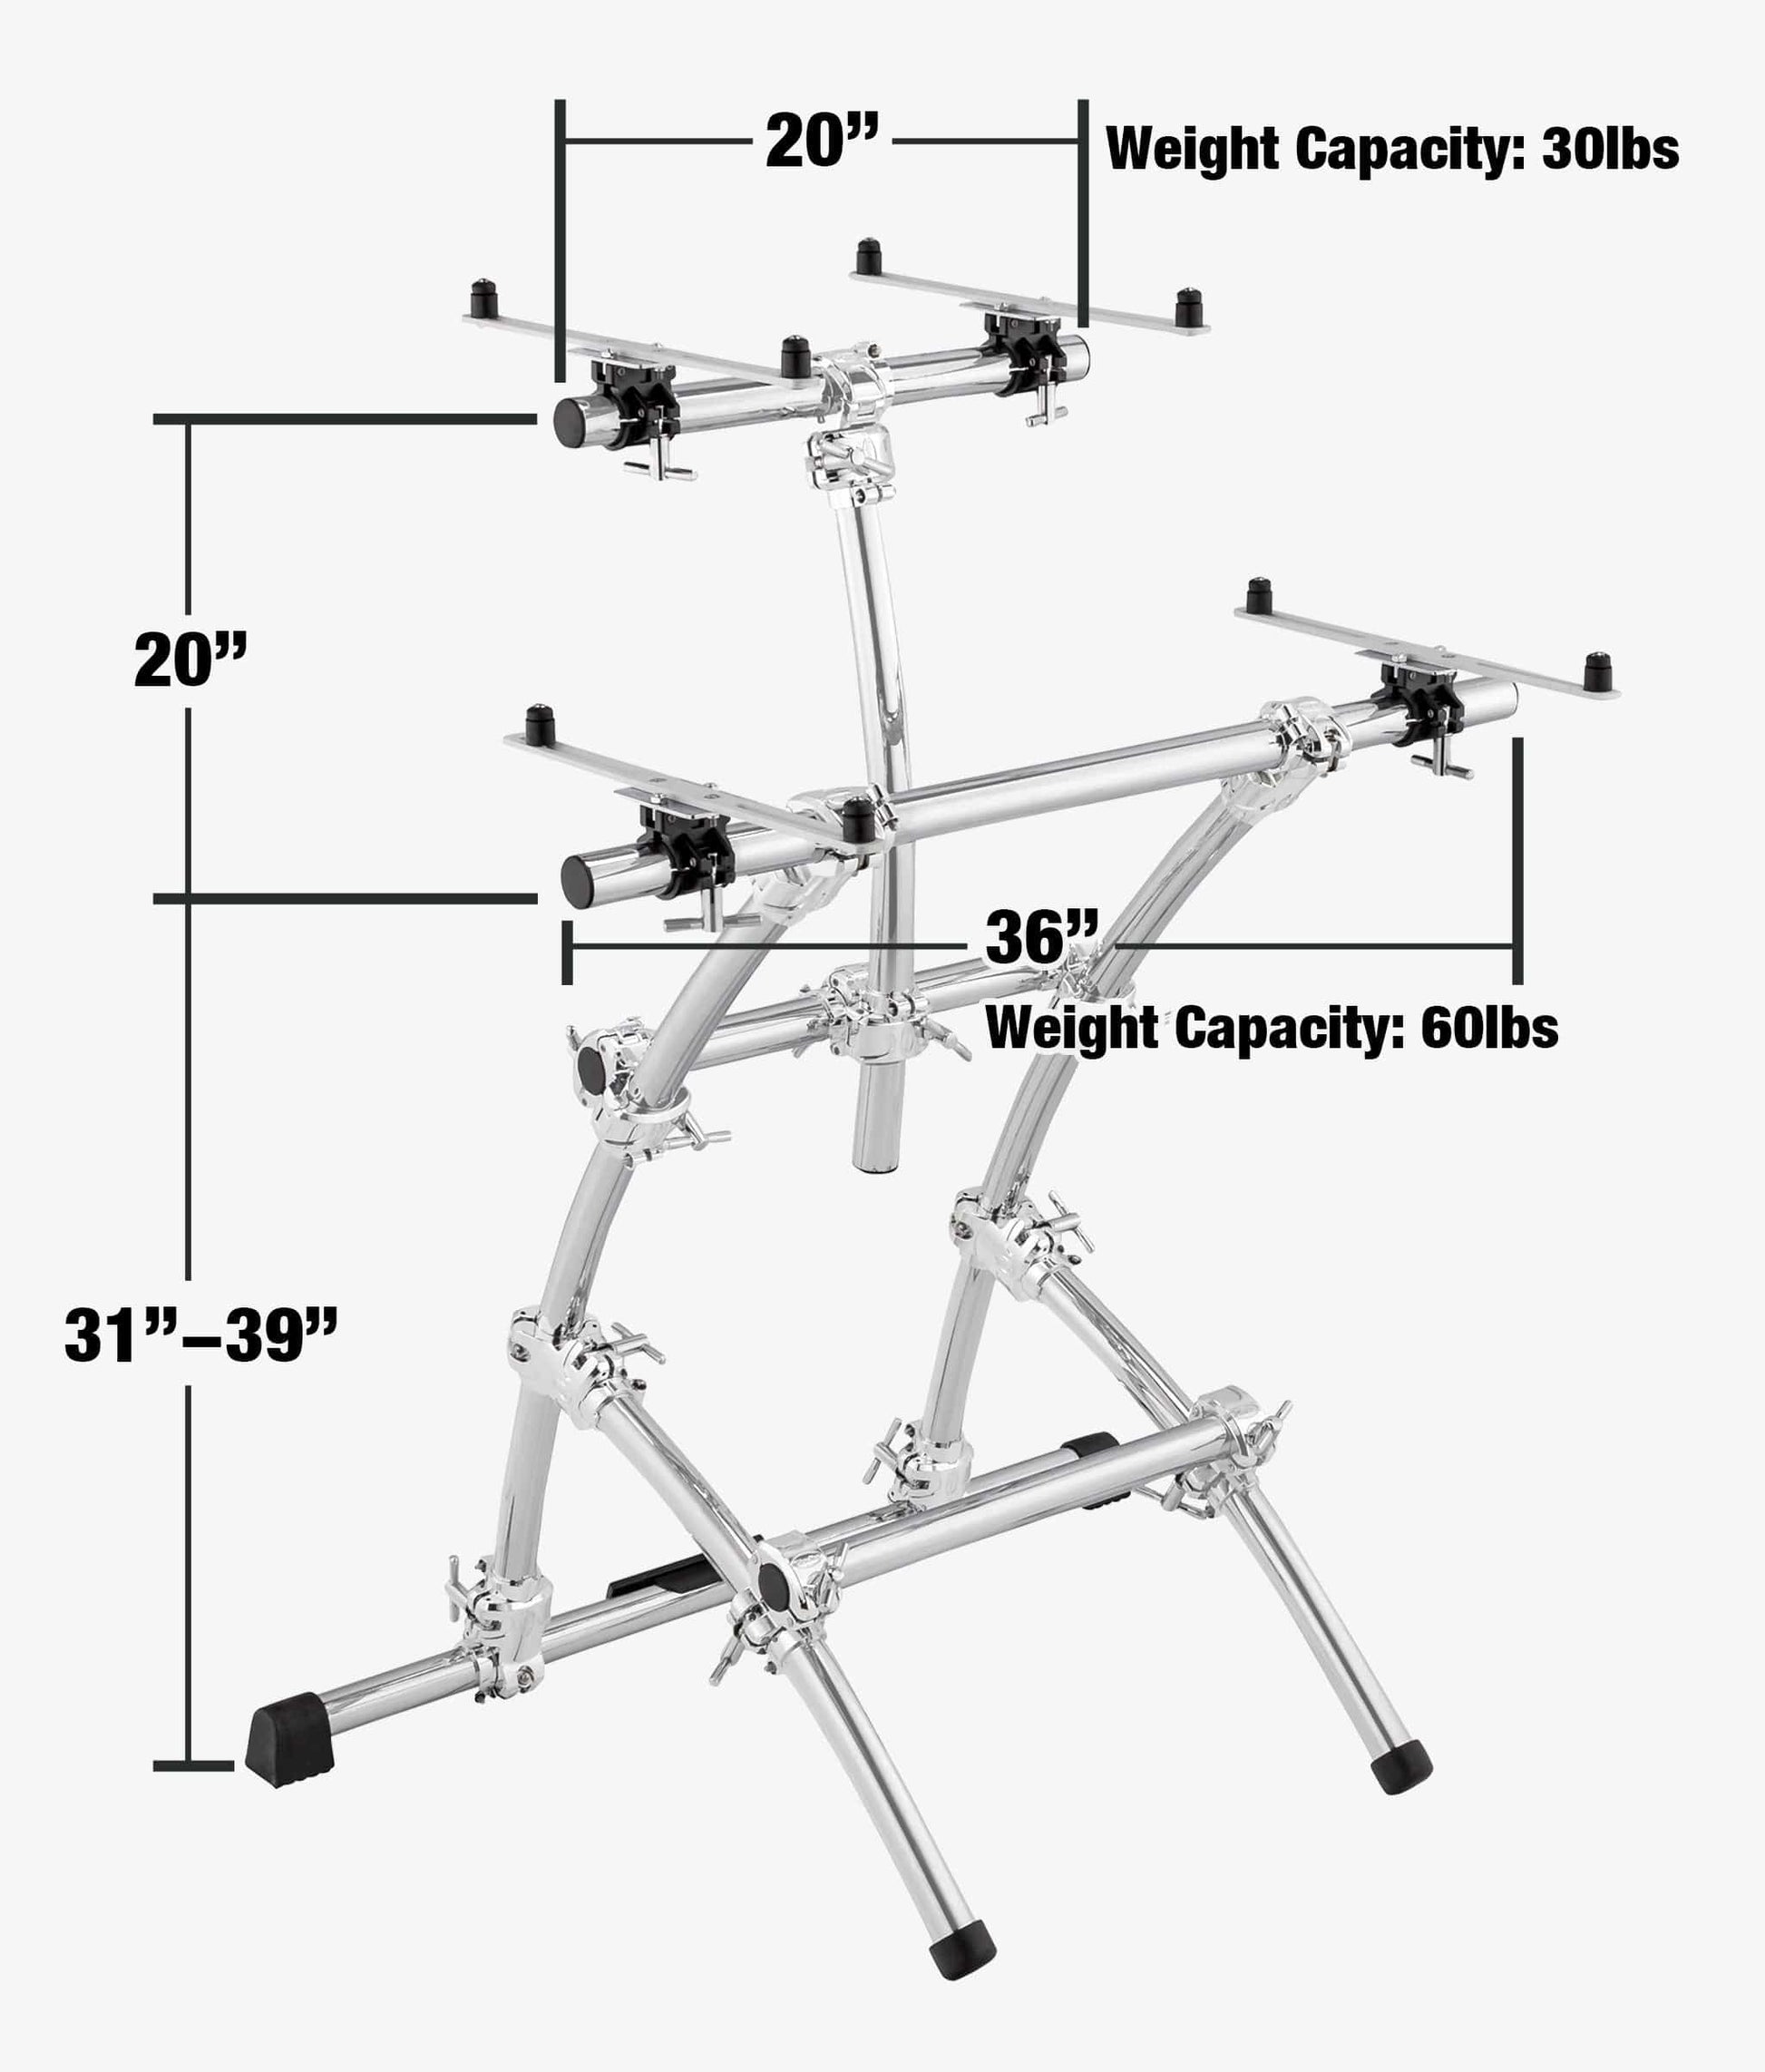 Gibraltar Double Keytree 2 Tier Keyboard Stand - Keyboard Stand | Gibraltar